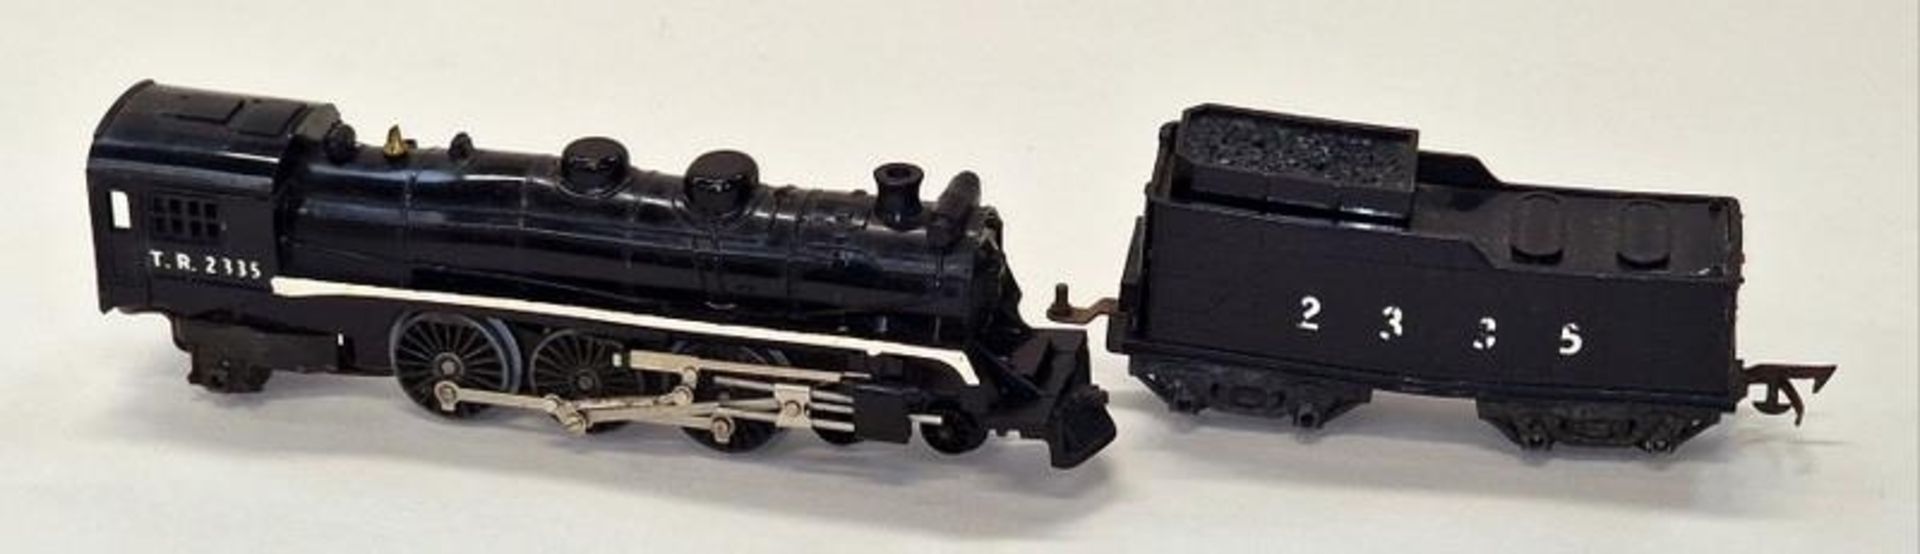 Triang group to include 41612 locomotive plus tender and a collection of rolling stock. - Image 2 of 4